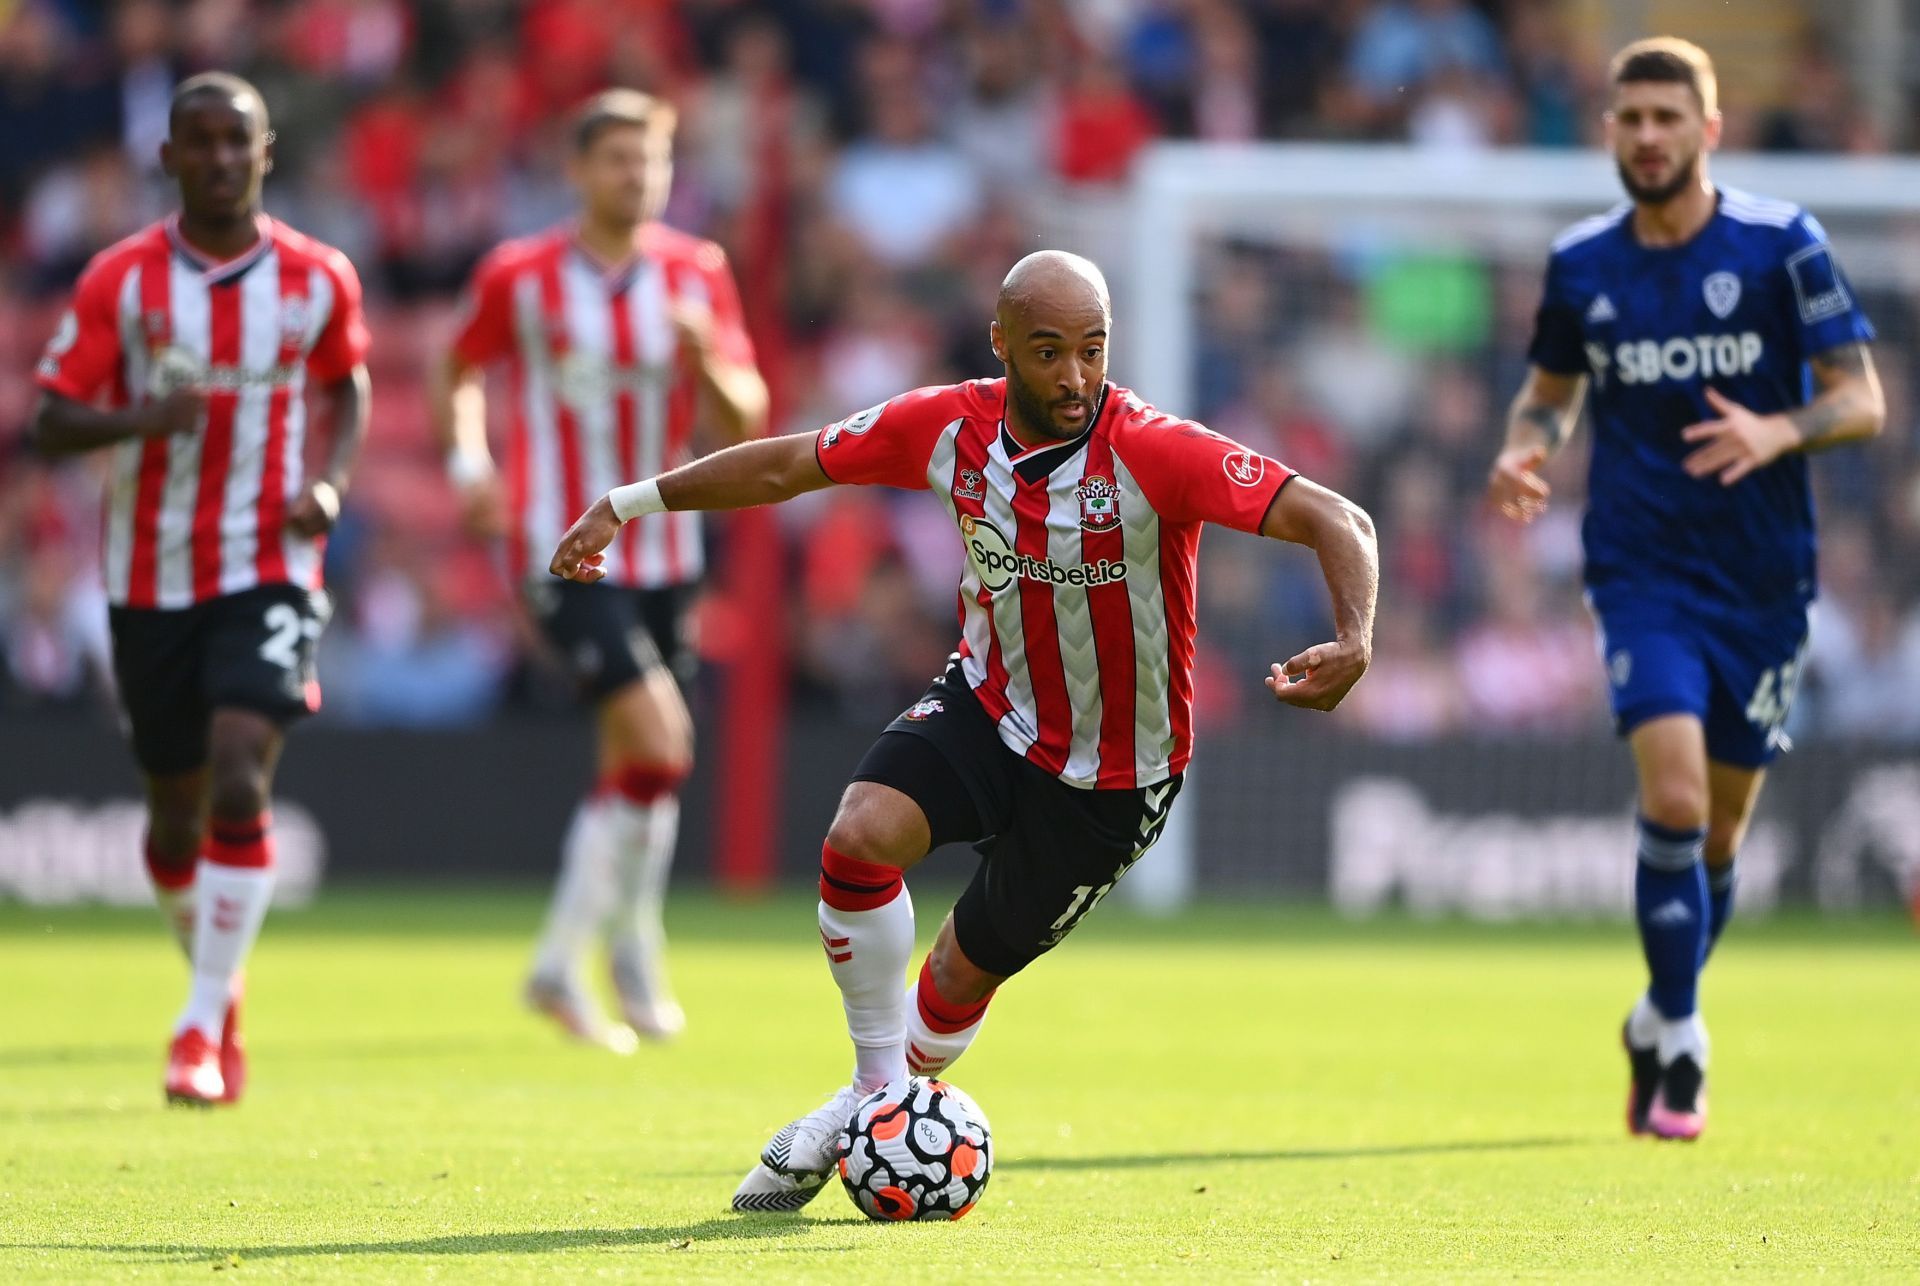 Southampton will look to build upon their win against Leeds United